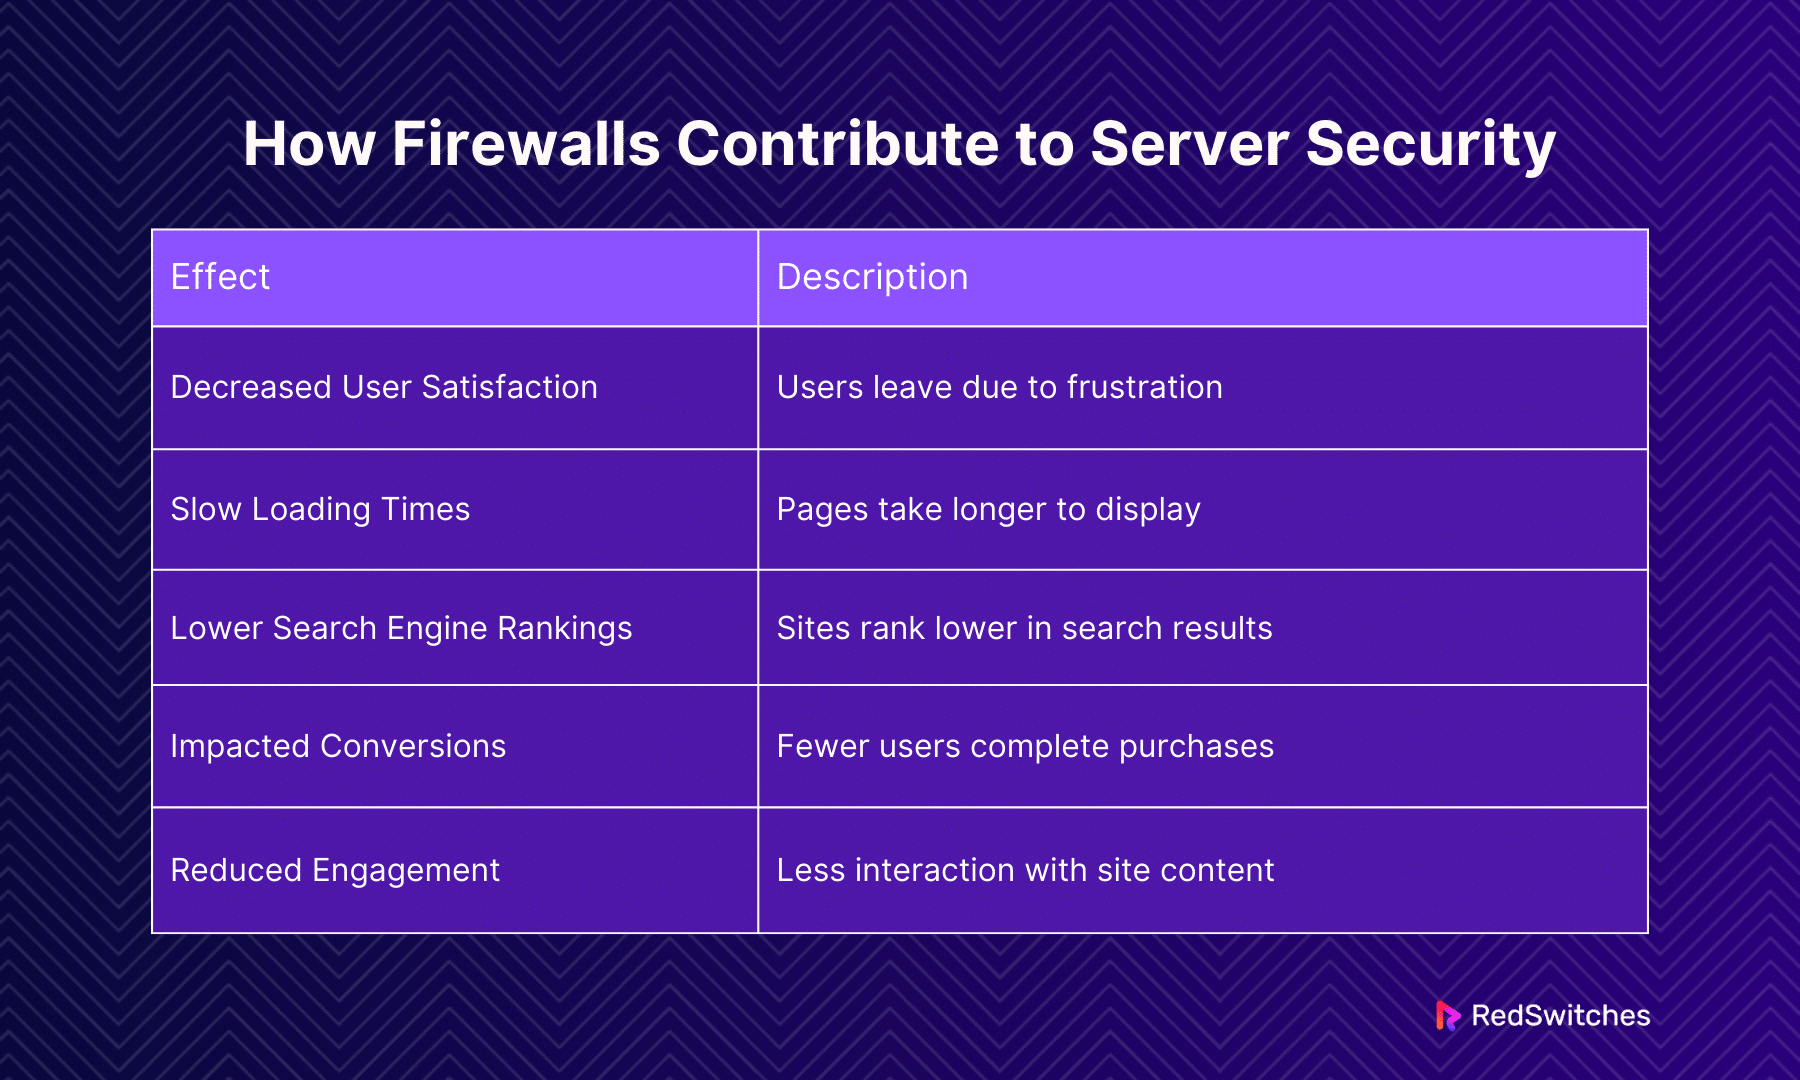 How firewall contribute to Server Security